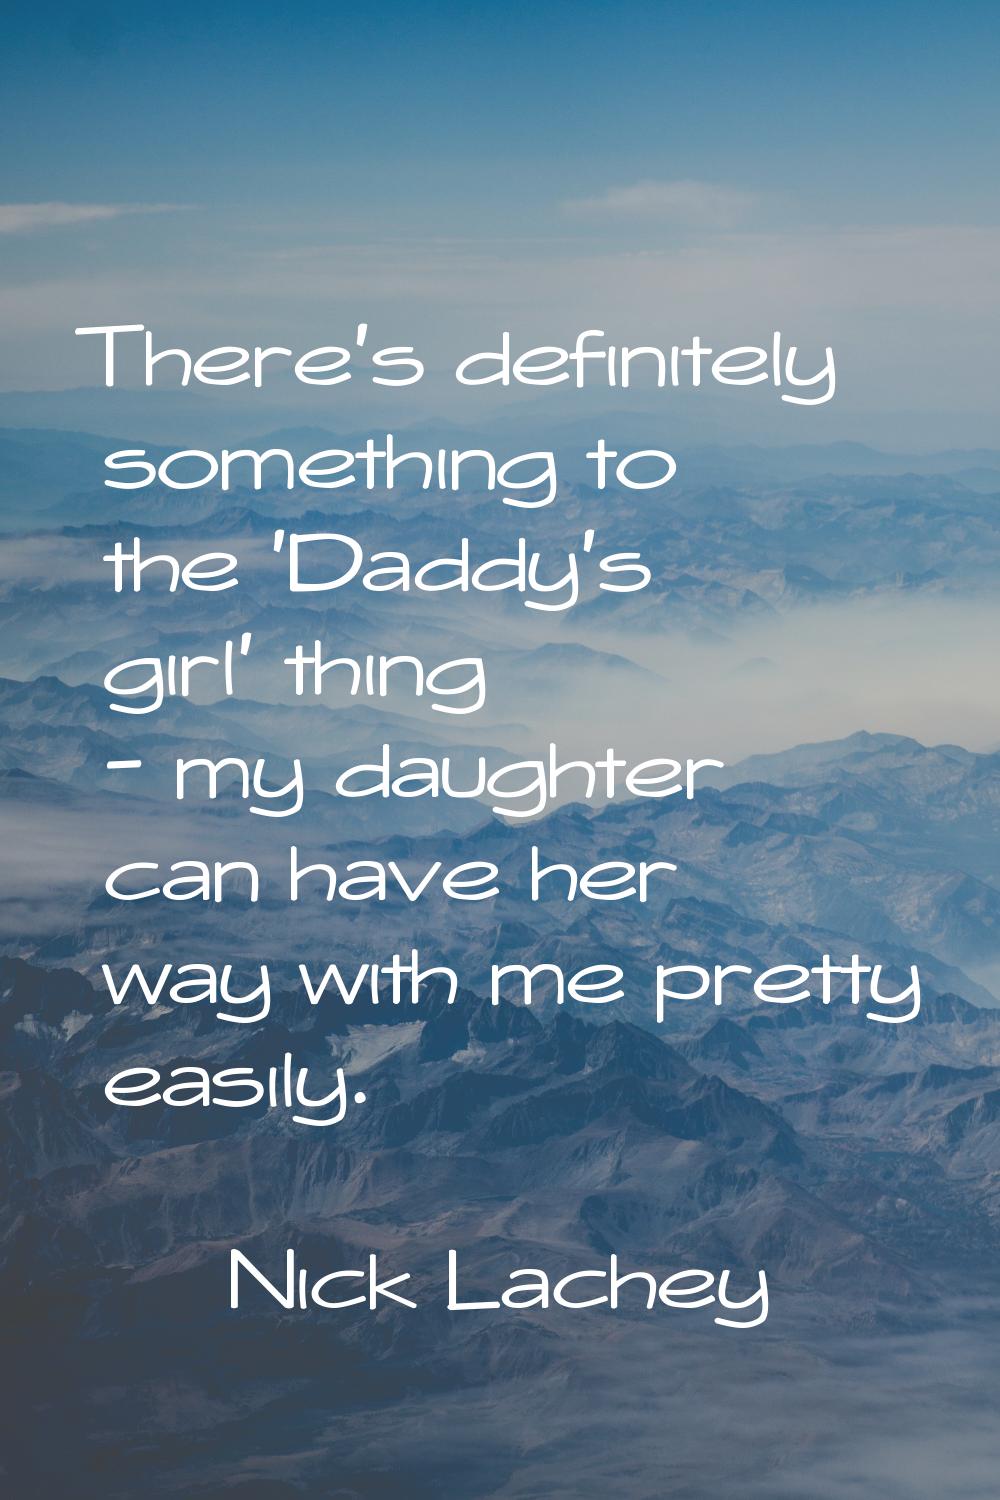 There's definitely something to the 'Daddy's girl' thing - my daughter can have her way with me pre